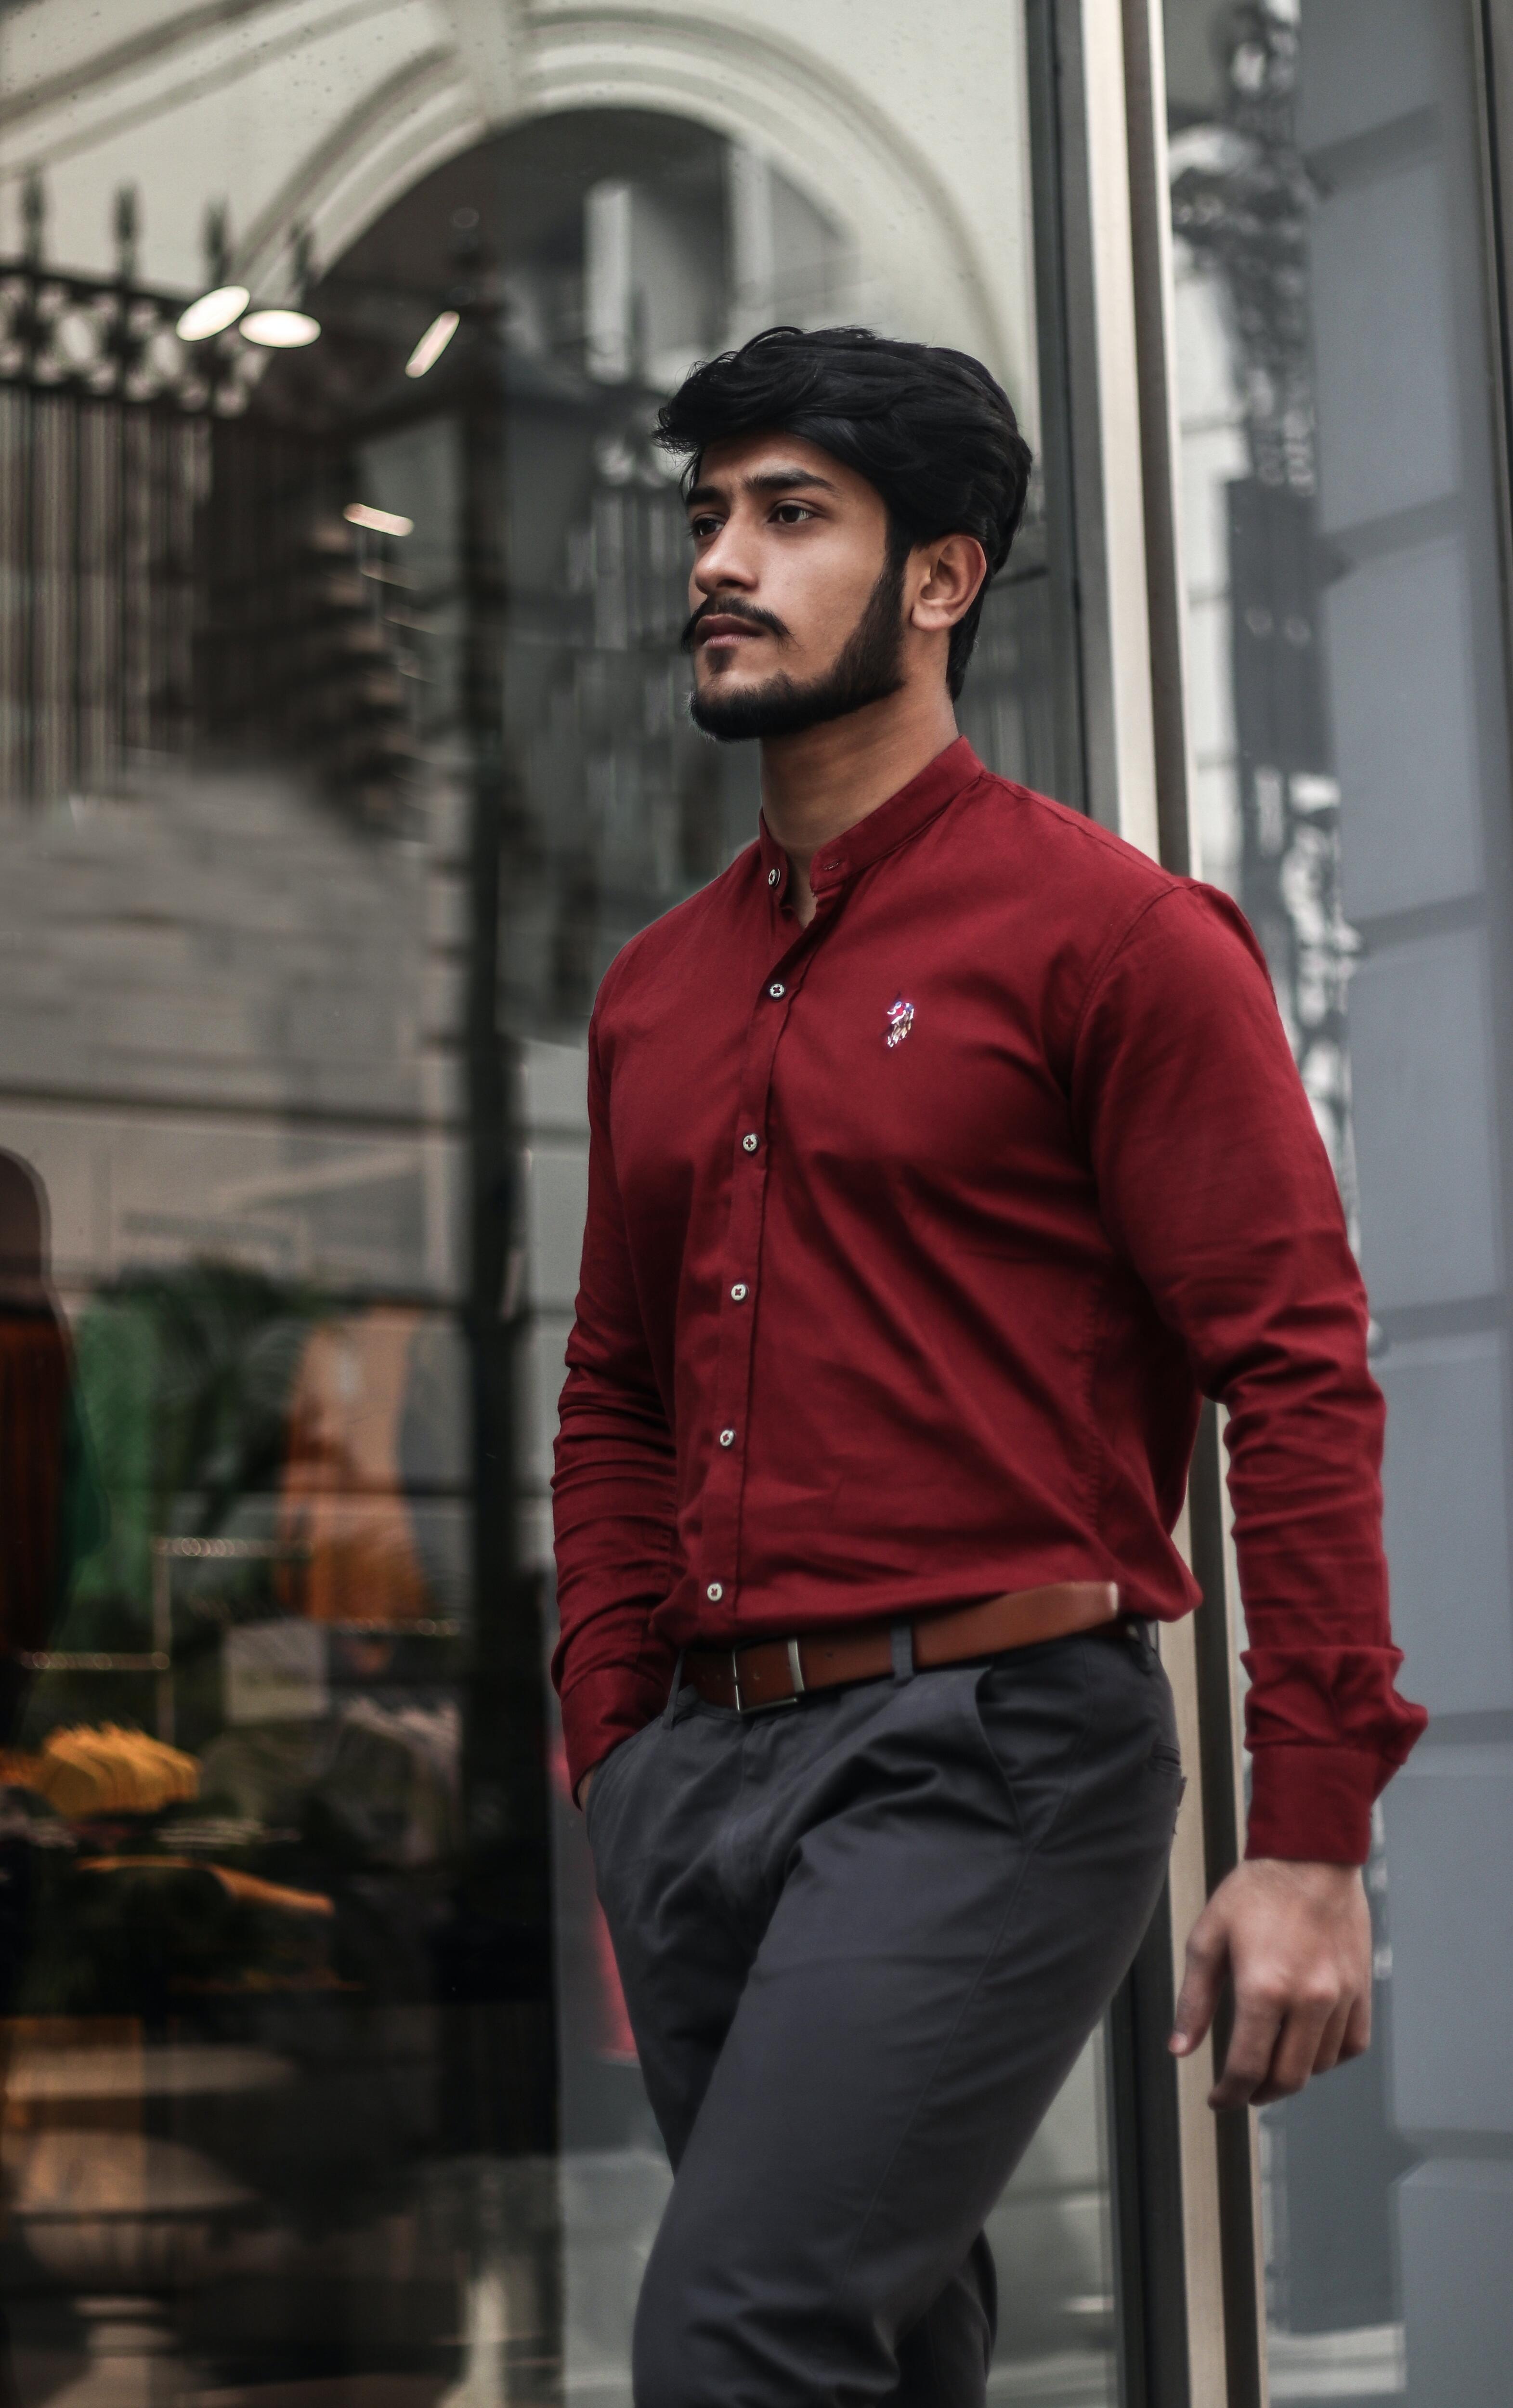 Man with neatly-trimmed facial hair in red button-up shirt and dark pants with belt walks along a street